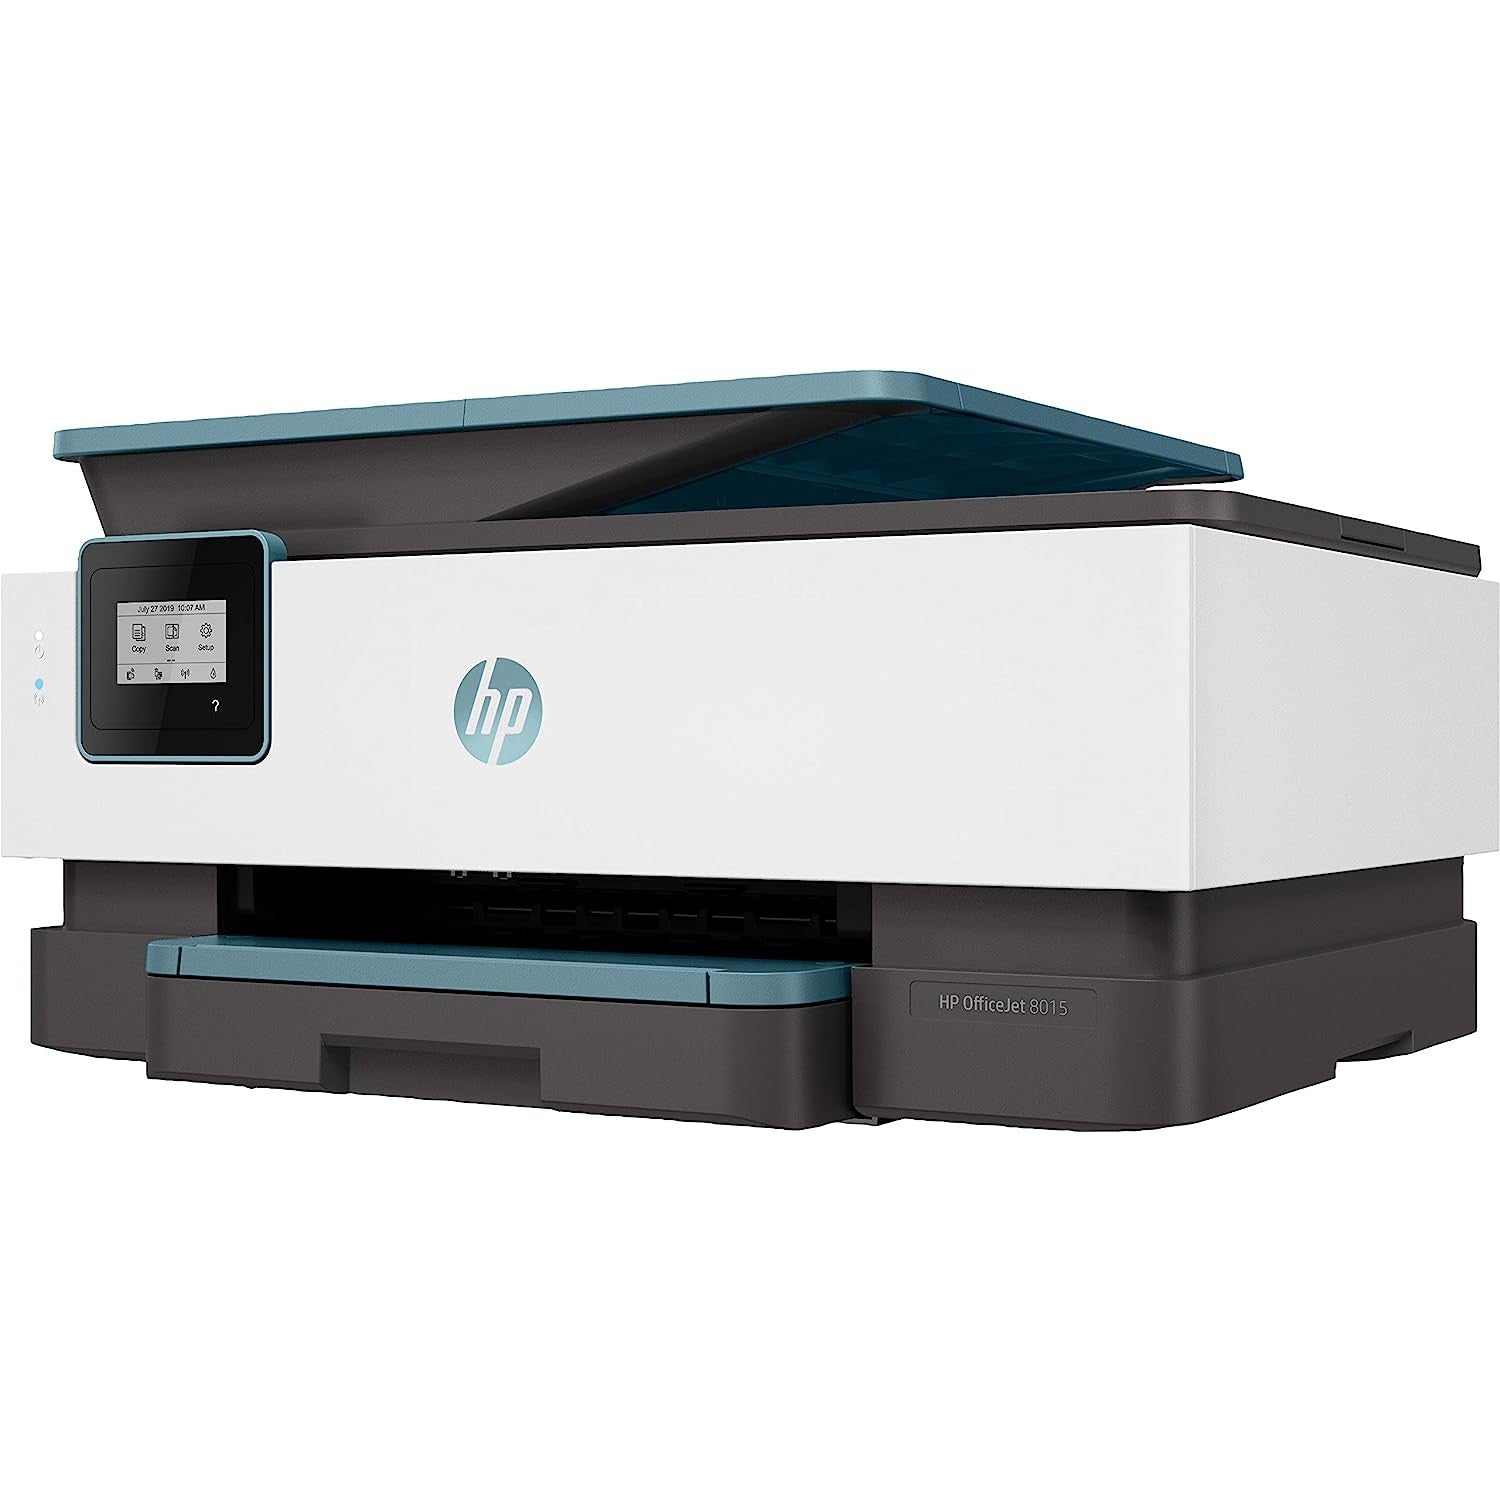 HP OfficeJet 8015 Colour Inkjet Wireless All-in-One Printer - Refurbished Excellent